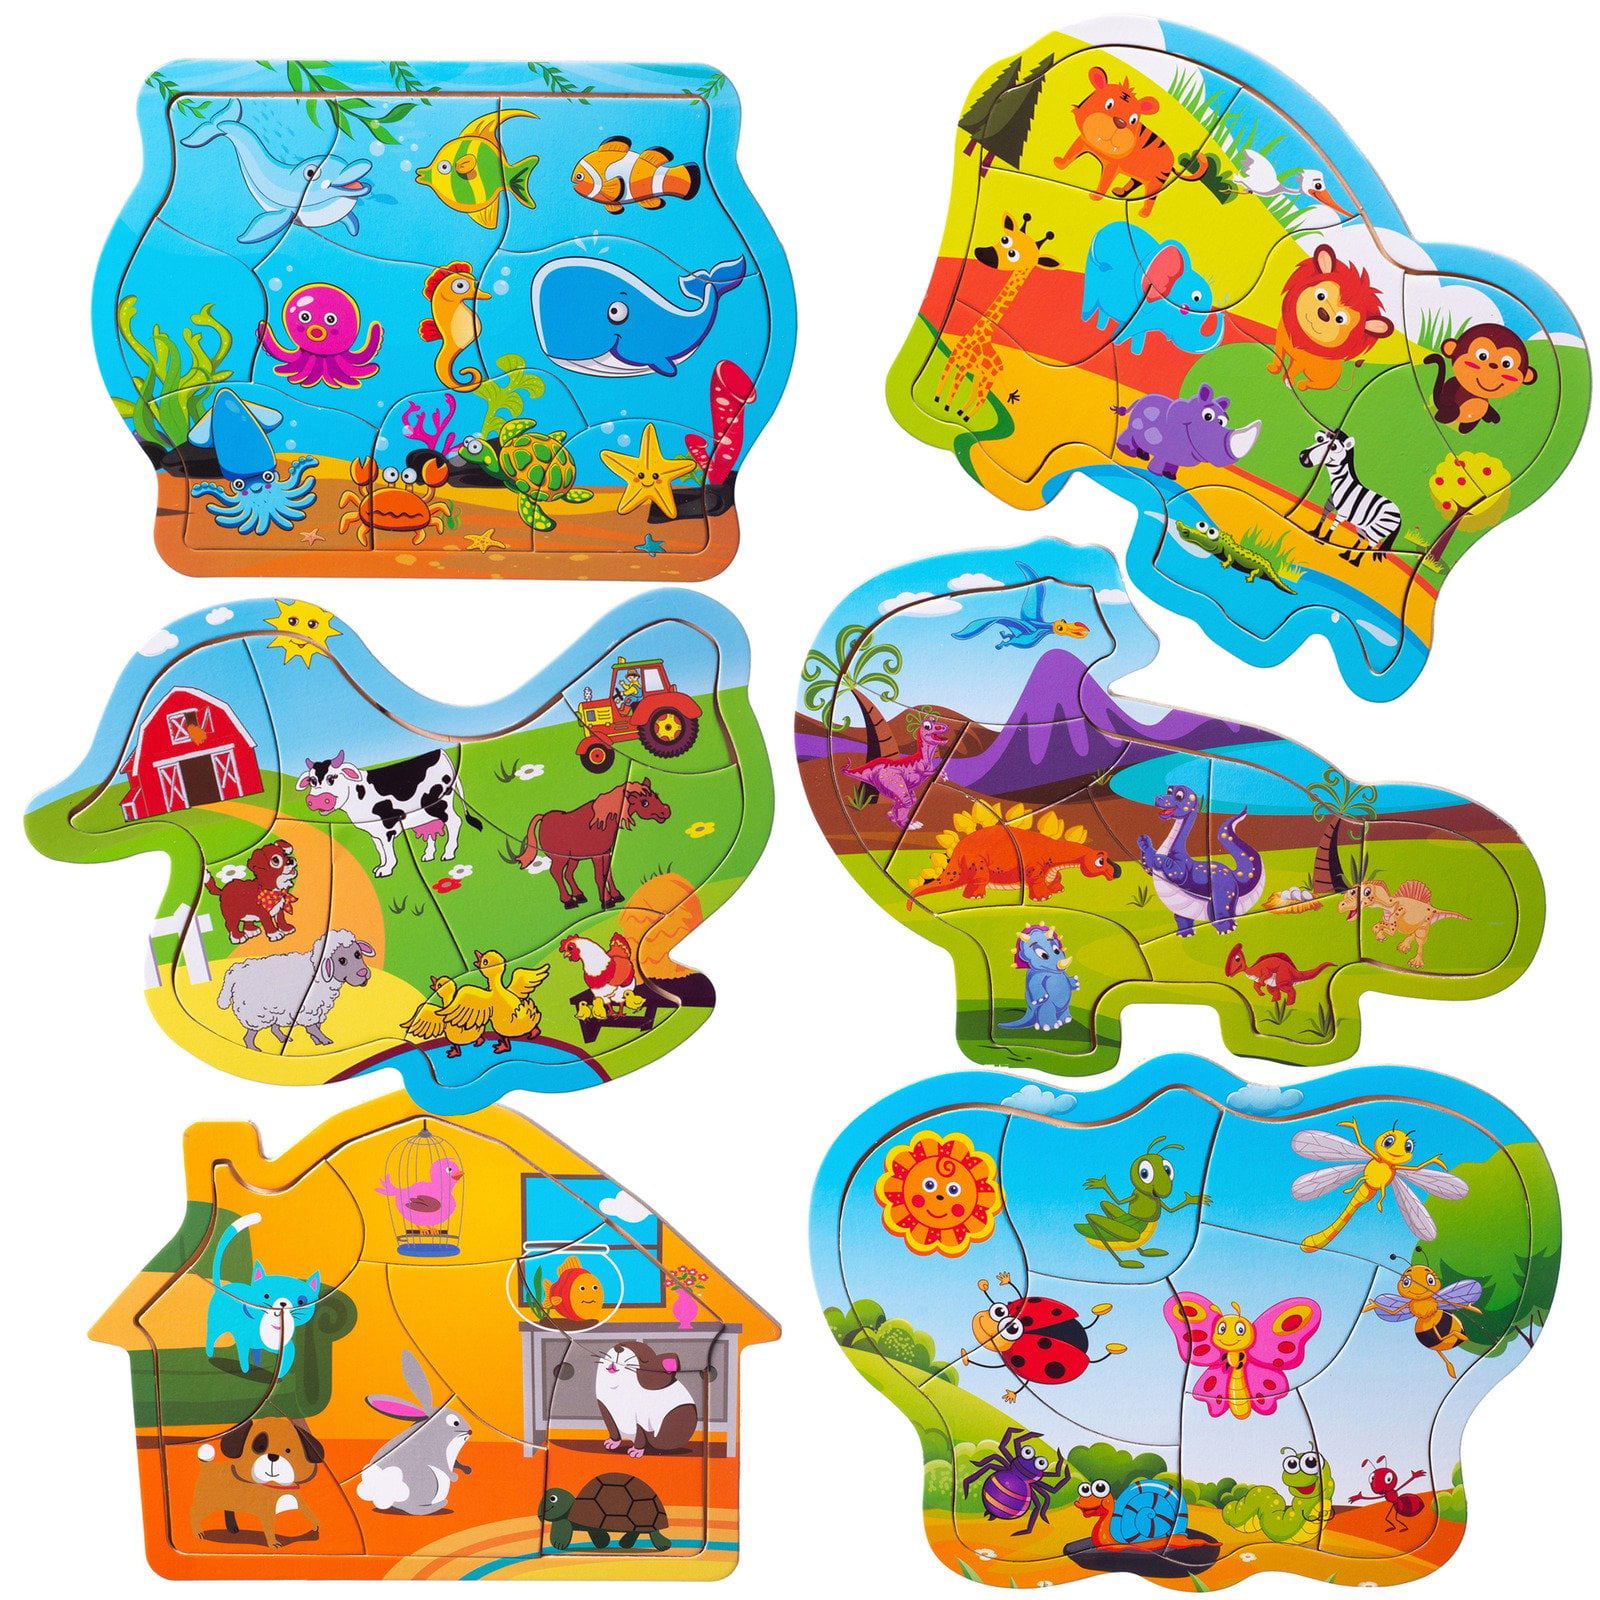 Eliiti Wooden Pets Animals Jigsaw Puzzle for Toddlers 2 to 4 Years Old Boy Girl 